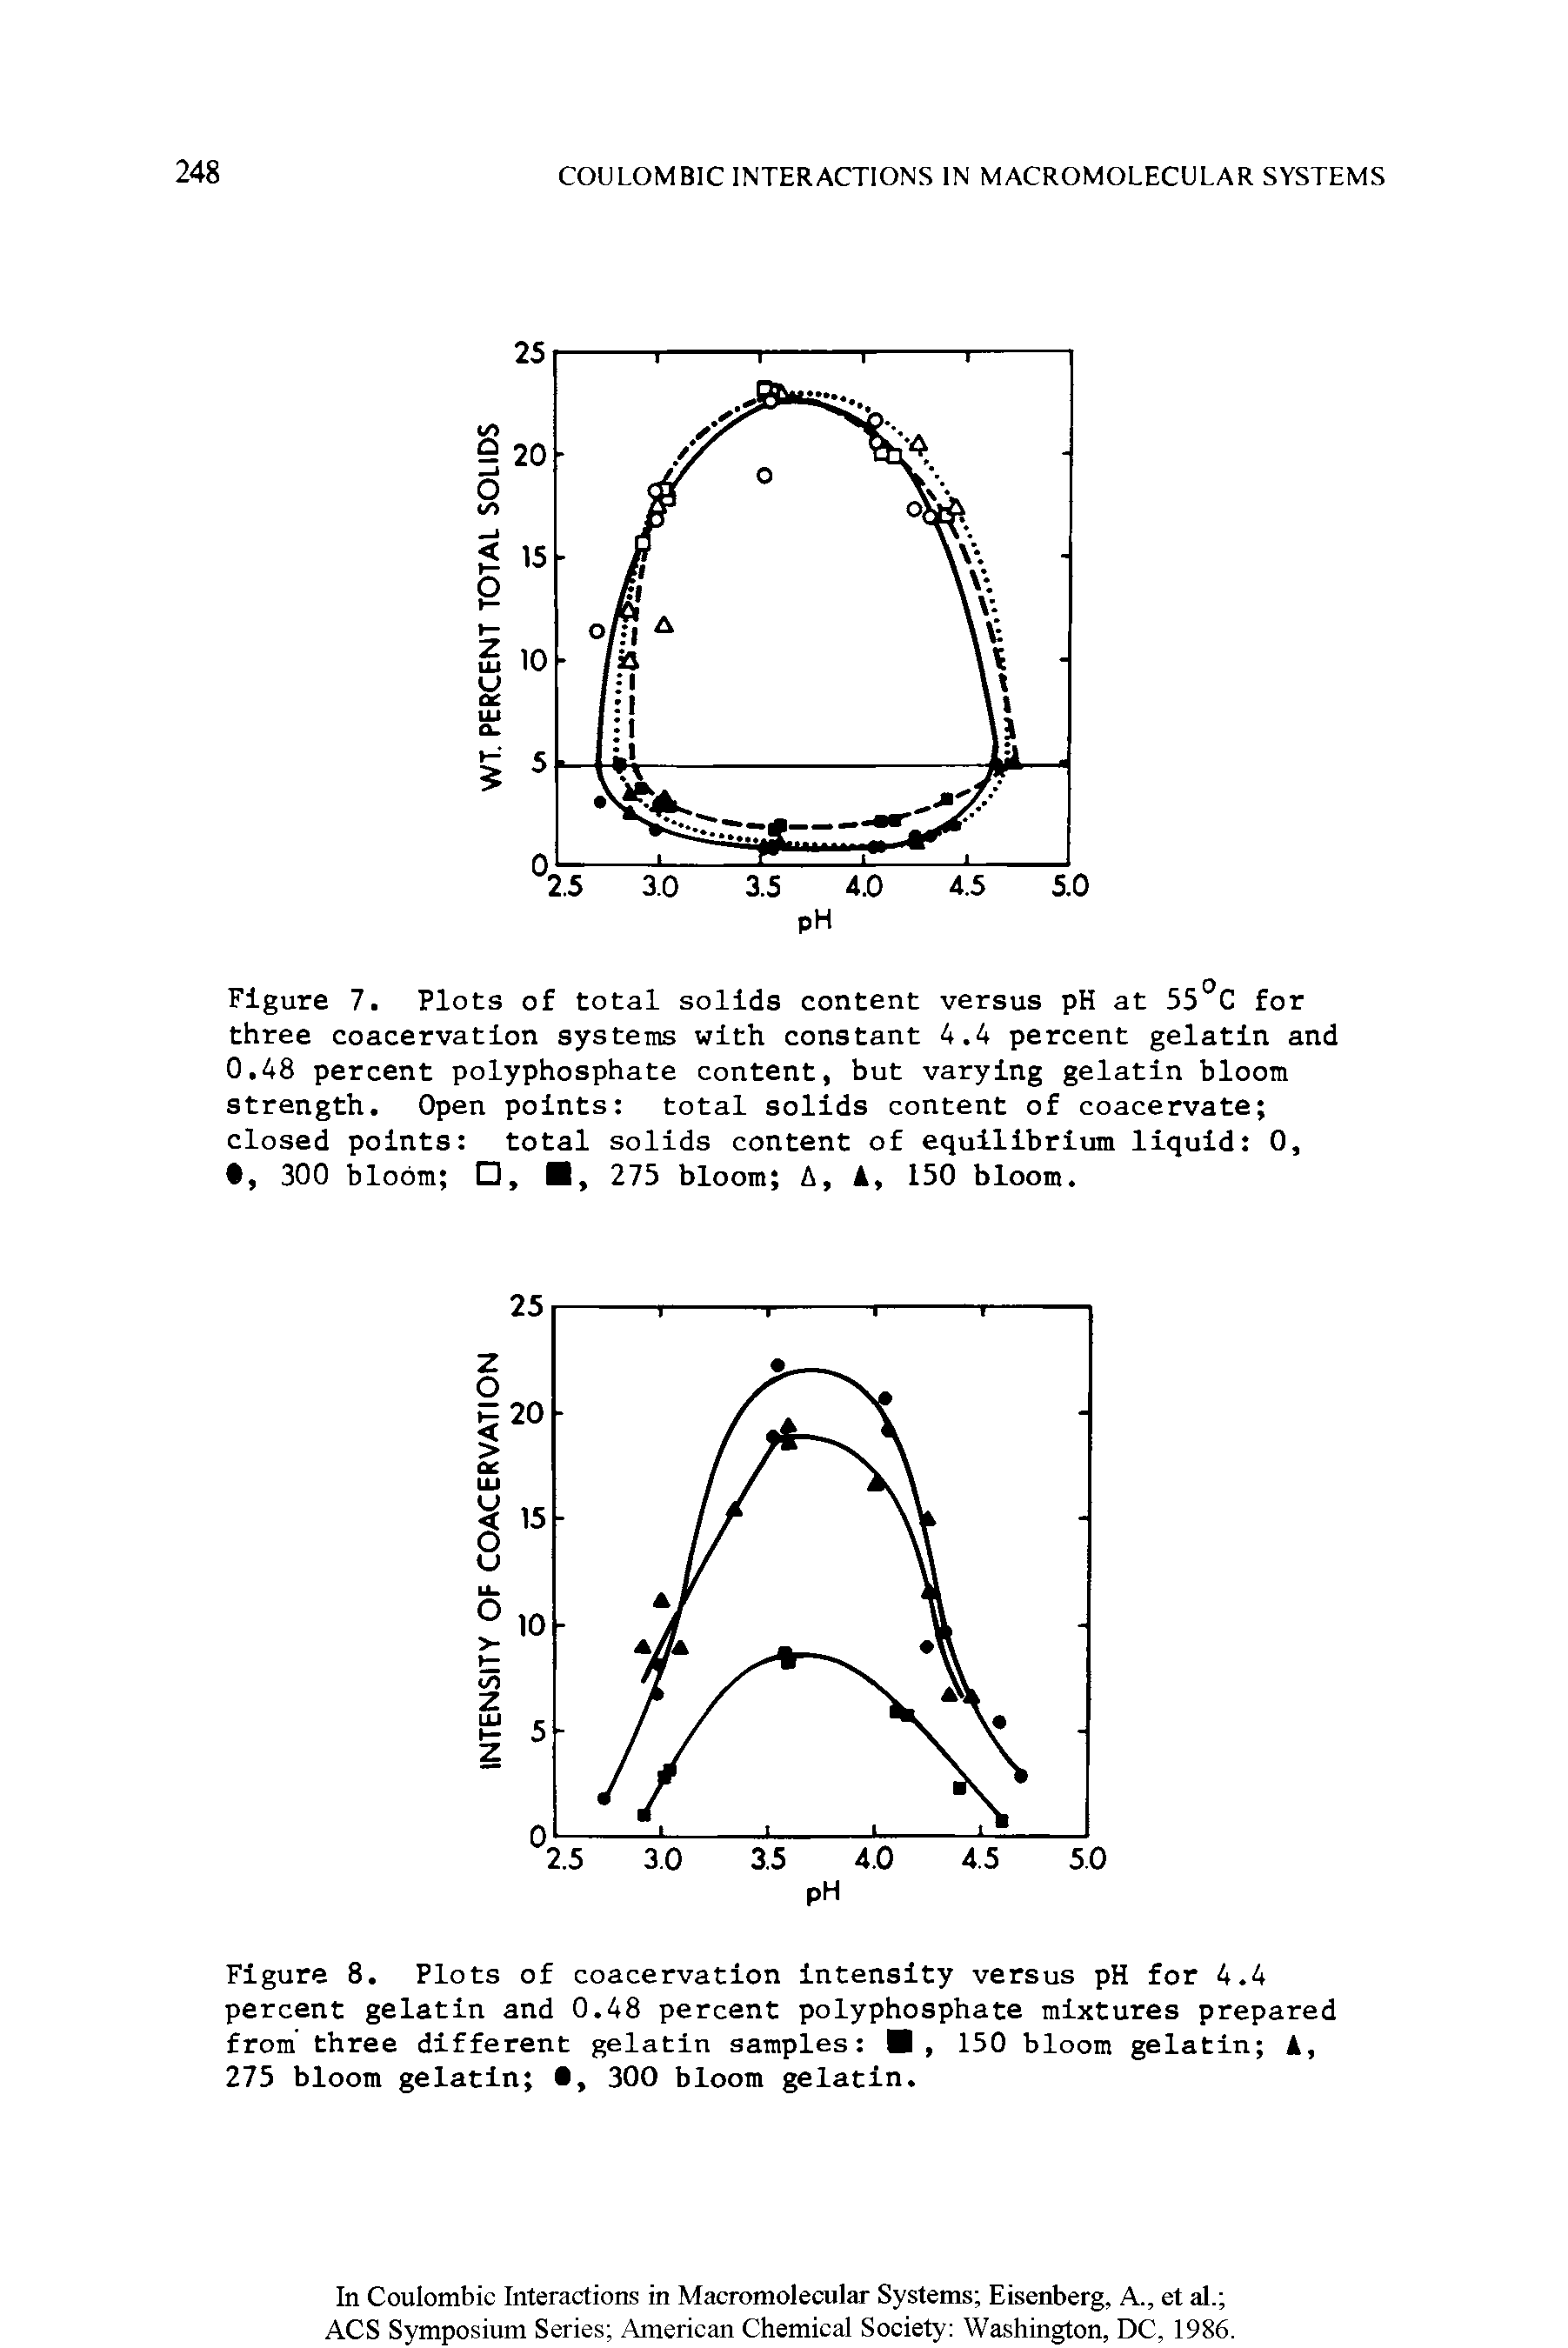 Figure 7. Plots of total solids content versus pH at 55°C for three coacervation systems with constant 4.4 percent gelatin and 0.48 percent polyphosphate content, but varying gelatin bloom strength. Open points total solids content of coacervate closed points total solids content of equilibrium liquid 0,...